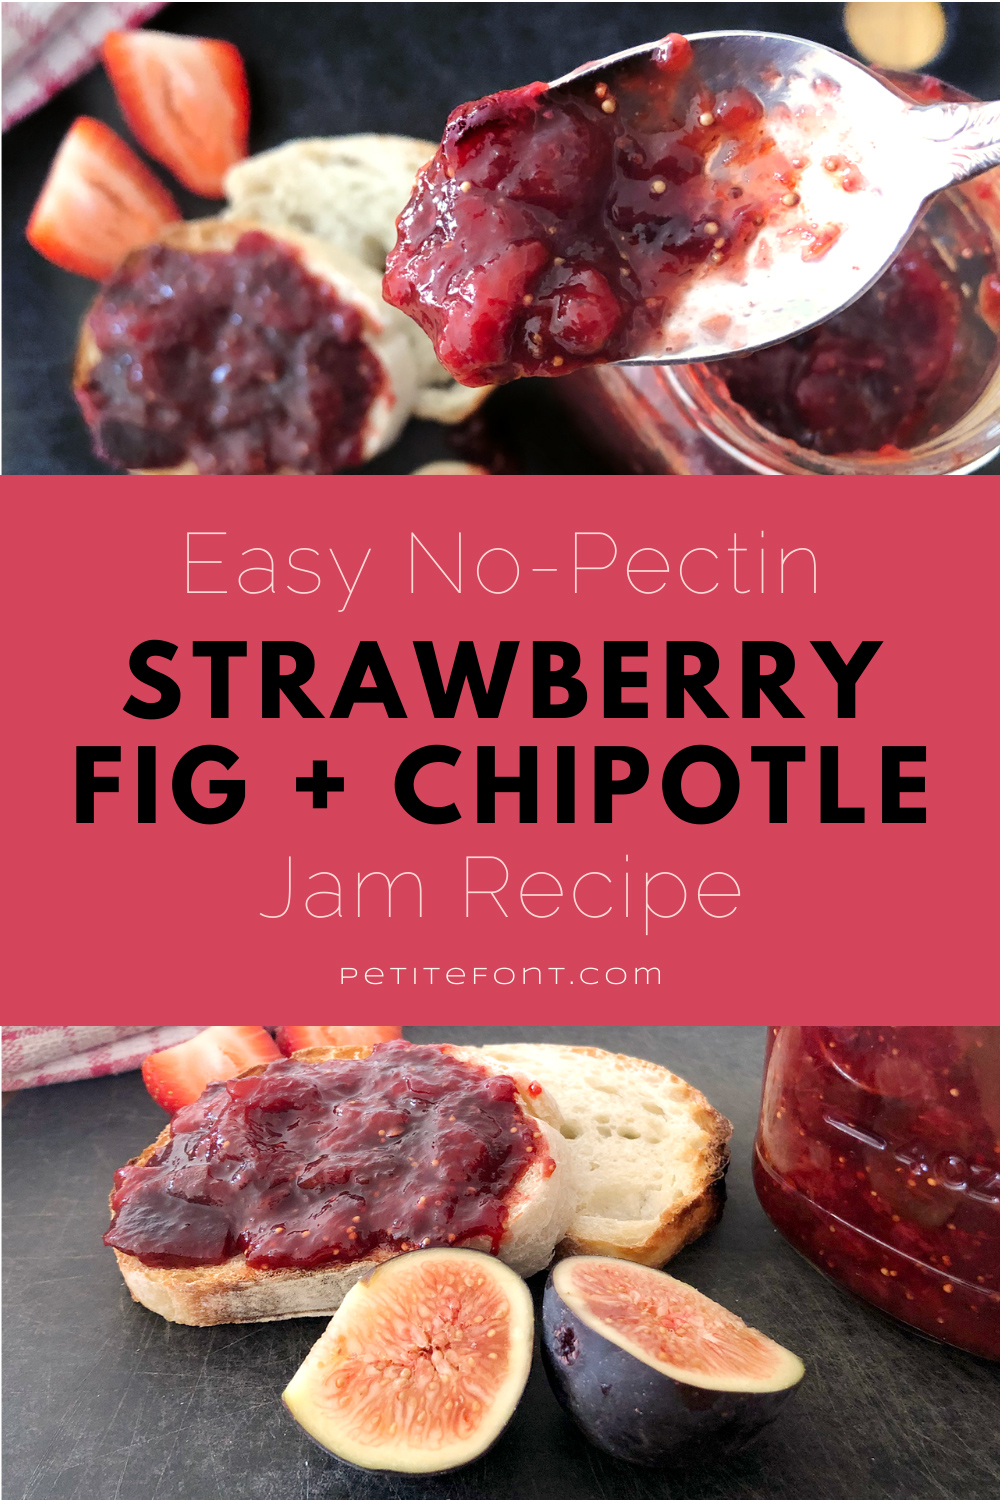 Top photo shows a spoonful of jam over toasted bread and jam plus some strawberries. Bottom photo zooms in on toast and figs. Text in middle reads "easy no-pectin strawberry fig and chipotle jam recipe"